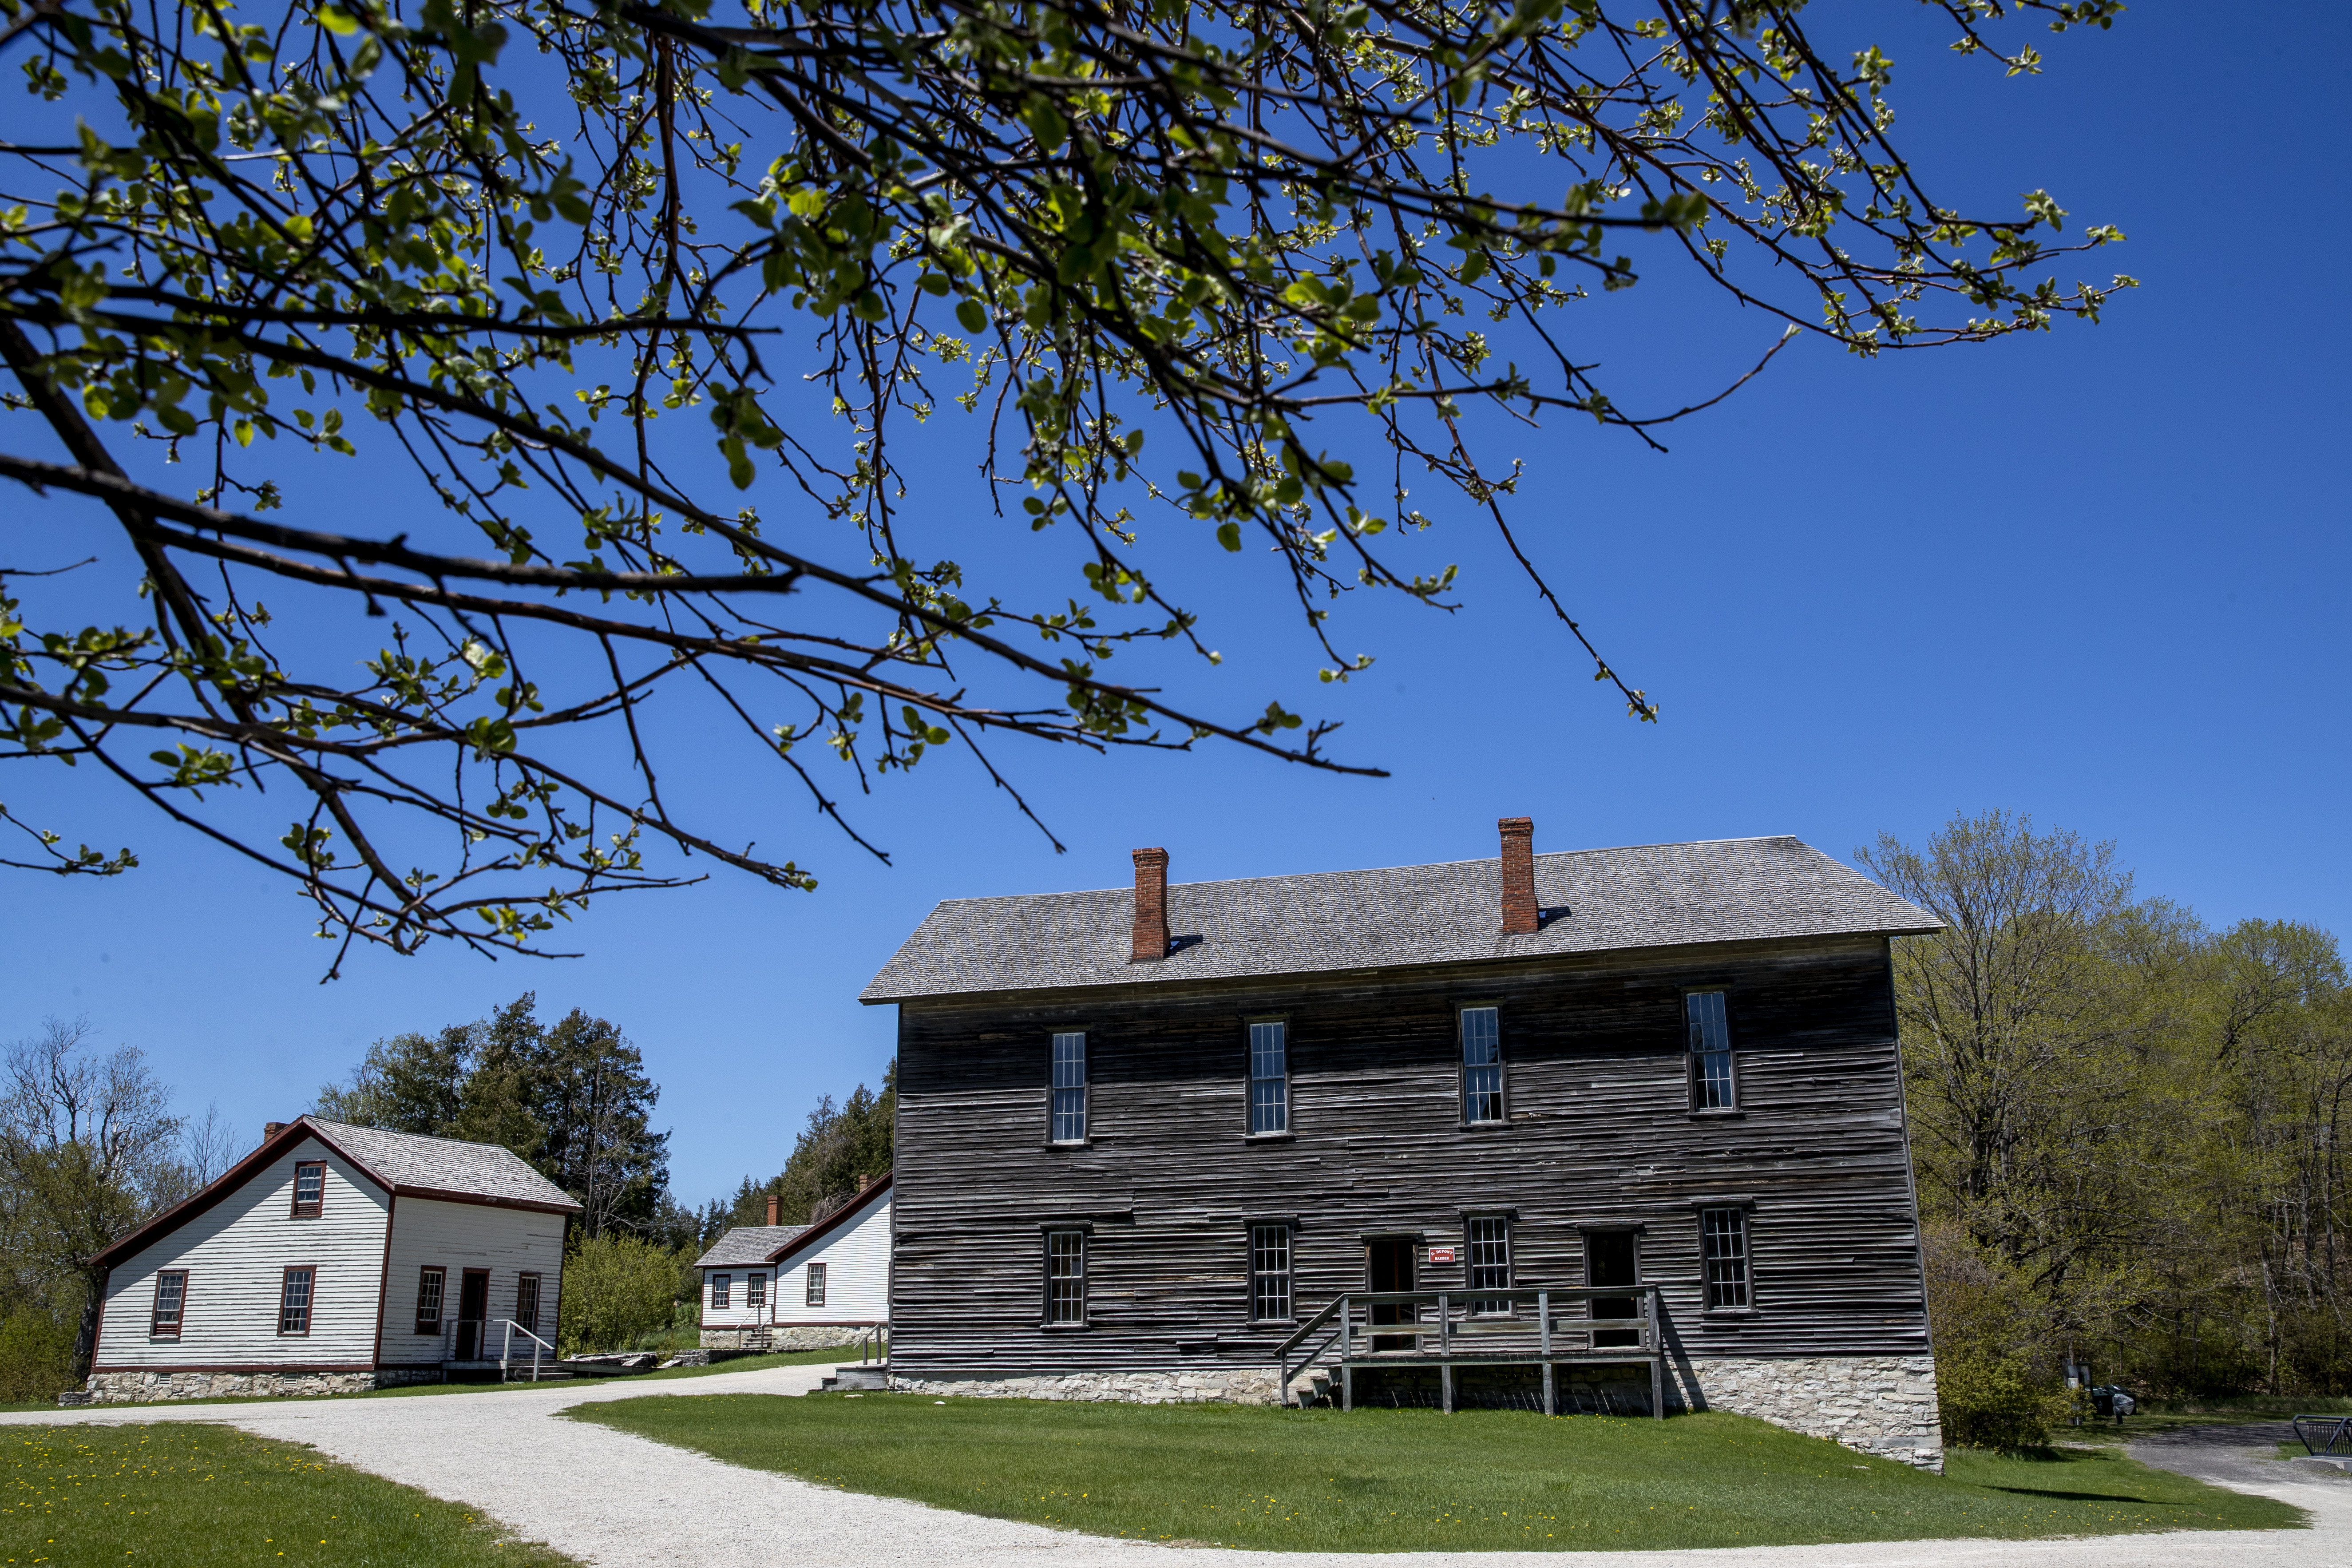 Historic townsite structures at Fayette Historic State Park near Garden on Tuesday, May 17, 2022. The historic townsite manufactured charcoal pig iron between 1867 and 1891. (Cory Morse | MLive.com)
